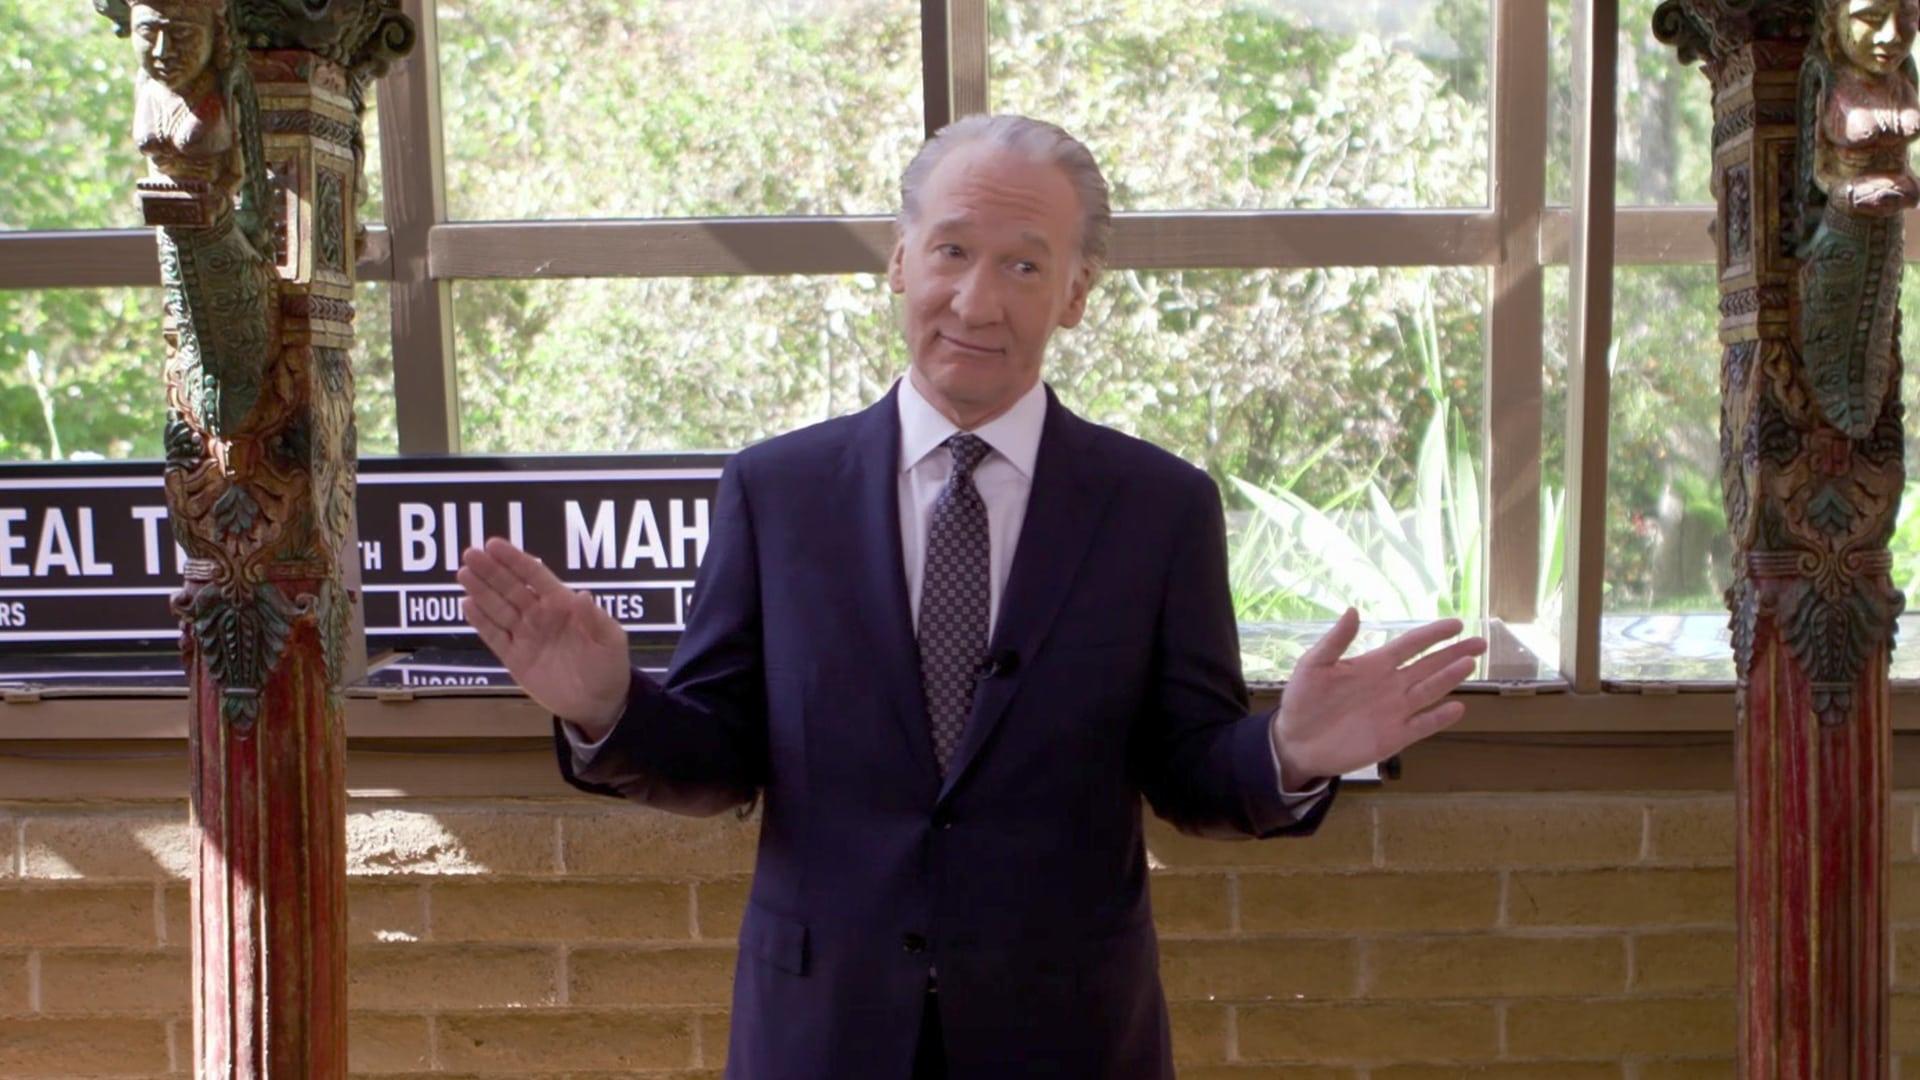 Real Time with Bill Maher (S18E11) Season 18, Episode 11 Summary